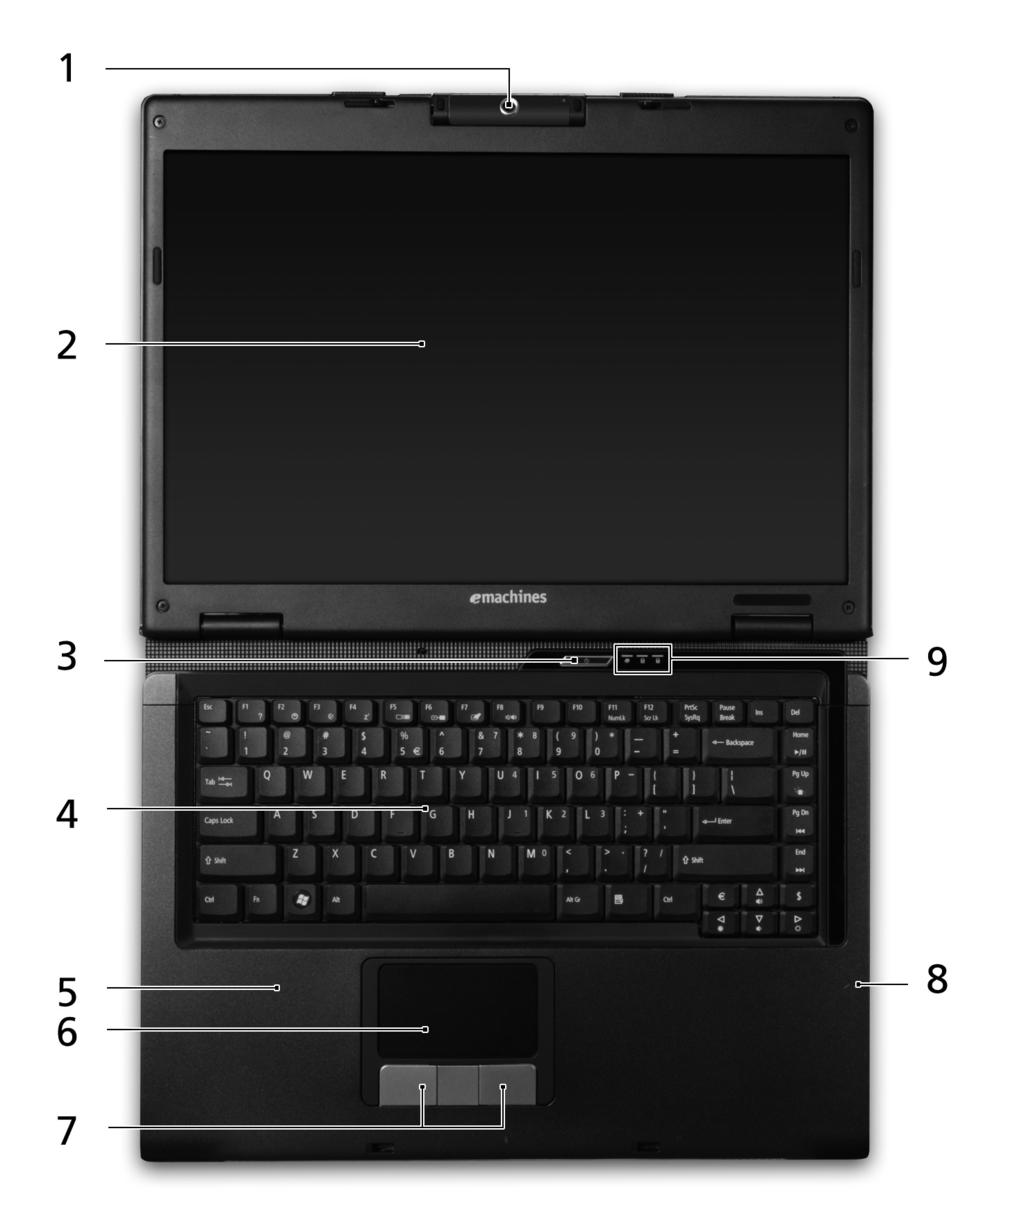 4 Your emachines notebook tour After setting up your computer as illustrated in the Just for Starters.